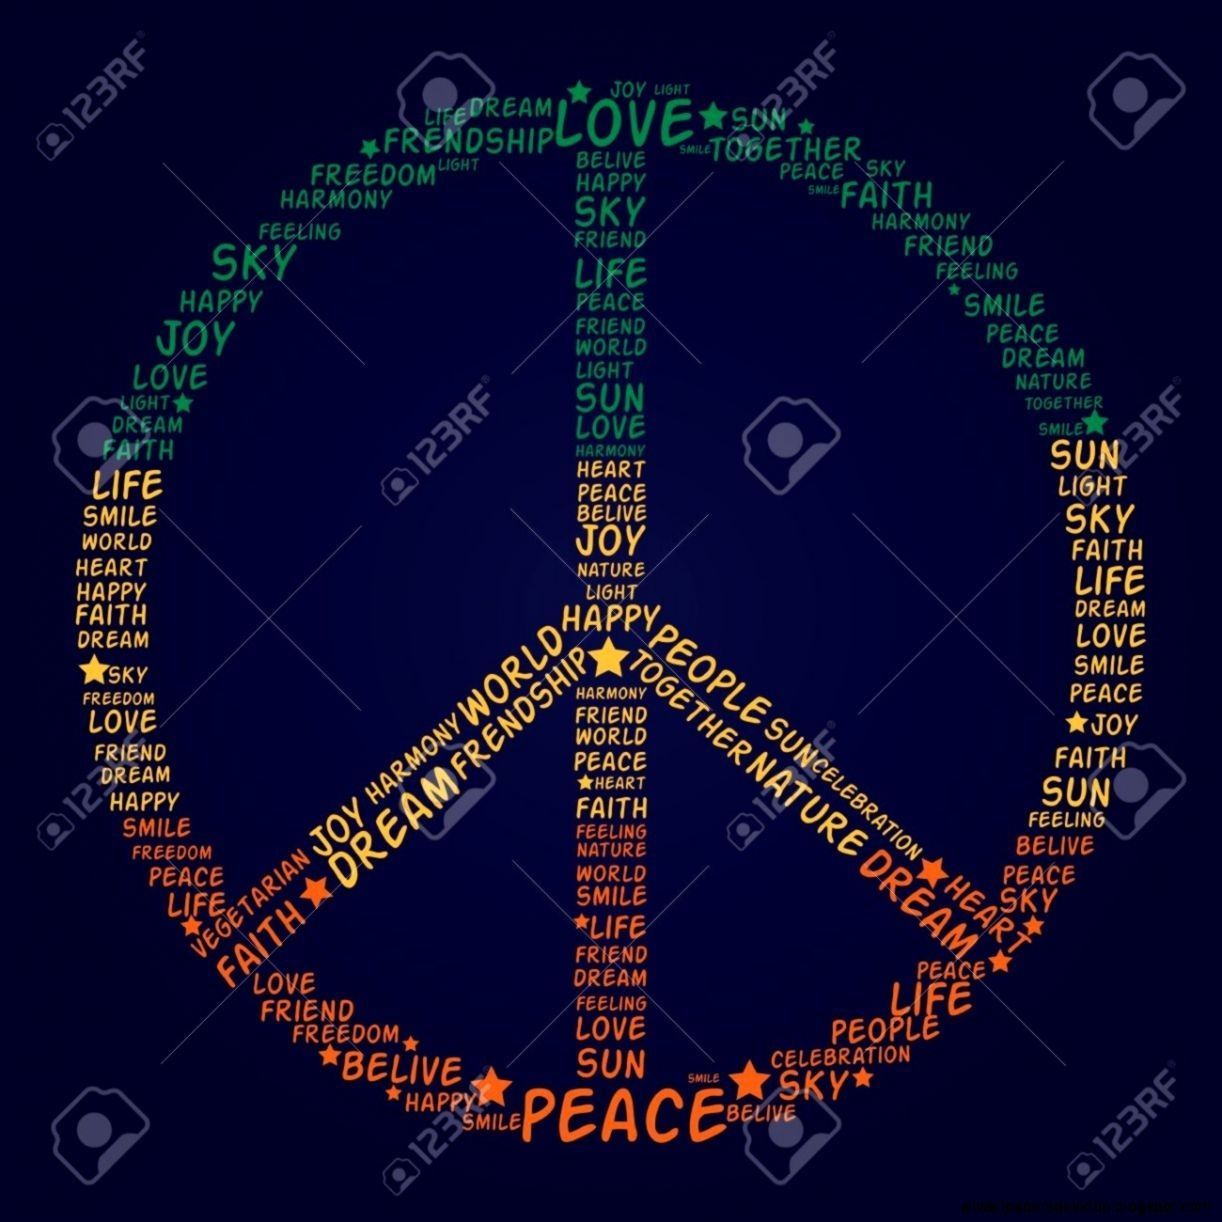 Peace Wallpapers on WallpaperDog